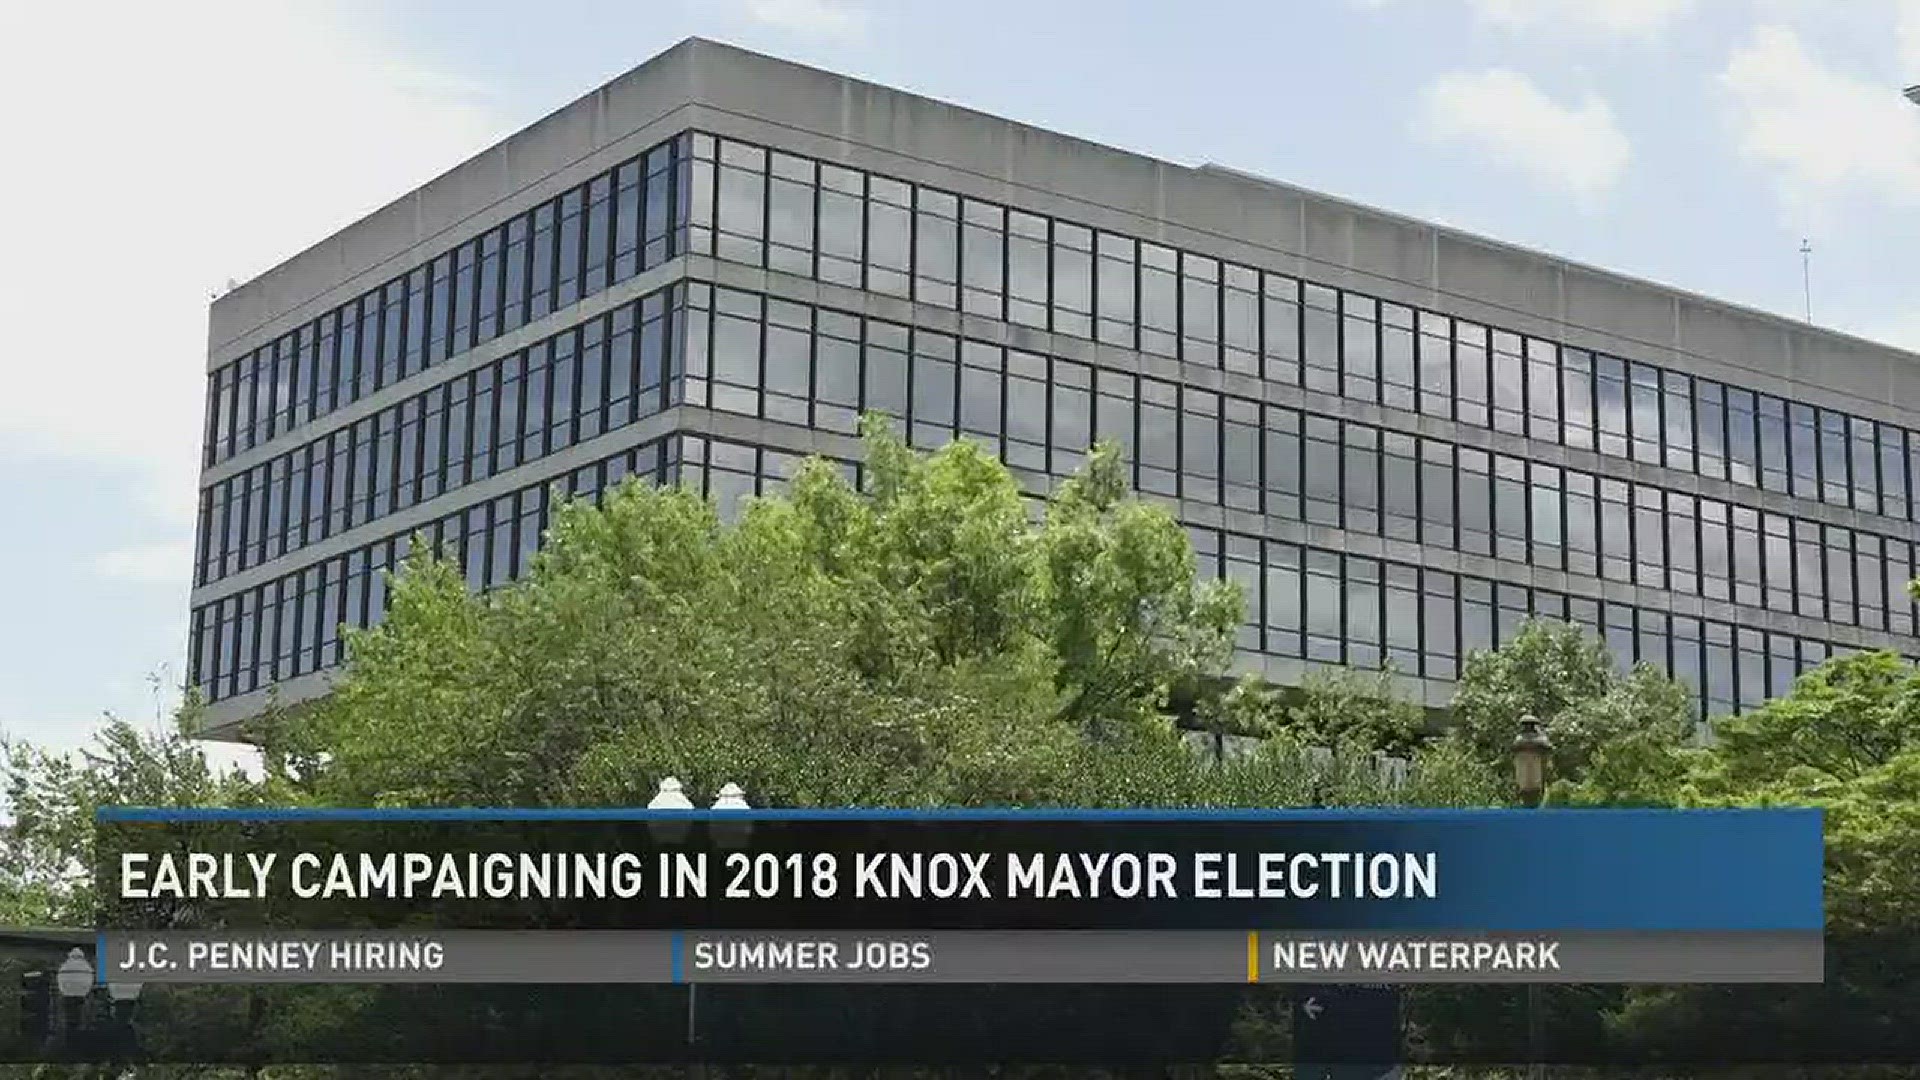 Sheriff JJ Jones has dropped out of the Knox Co. mayor's race. How does that affect the campaign?